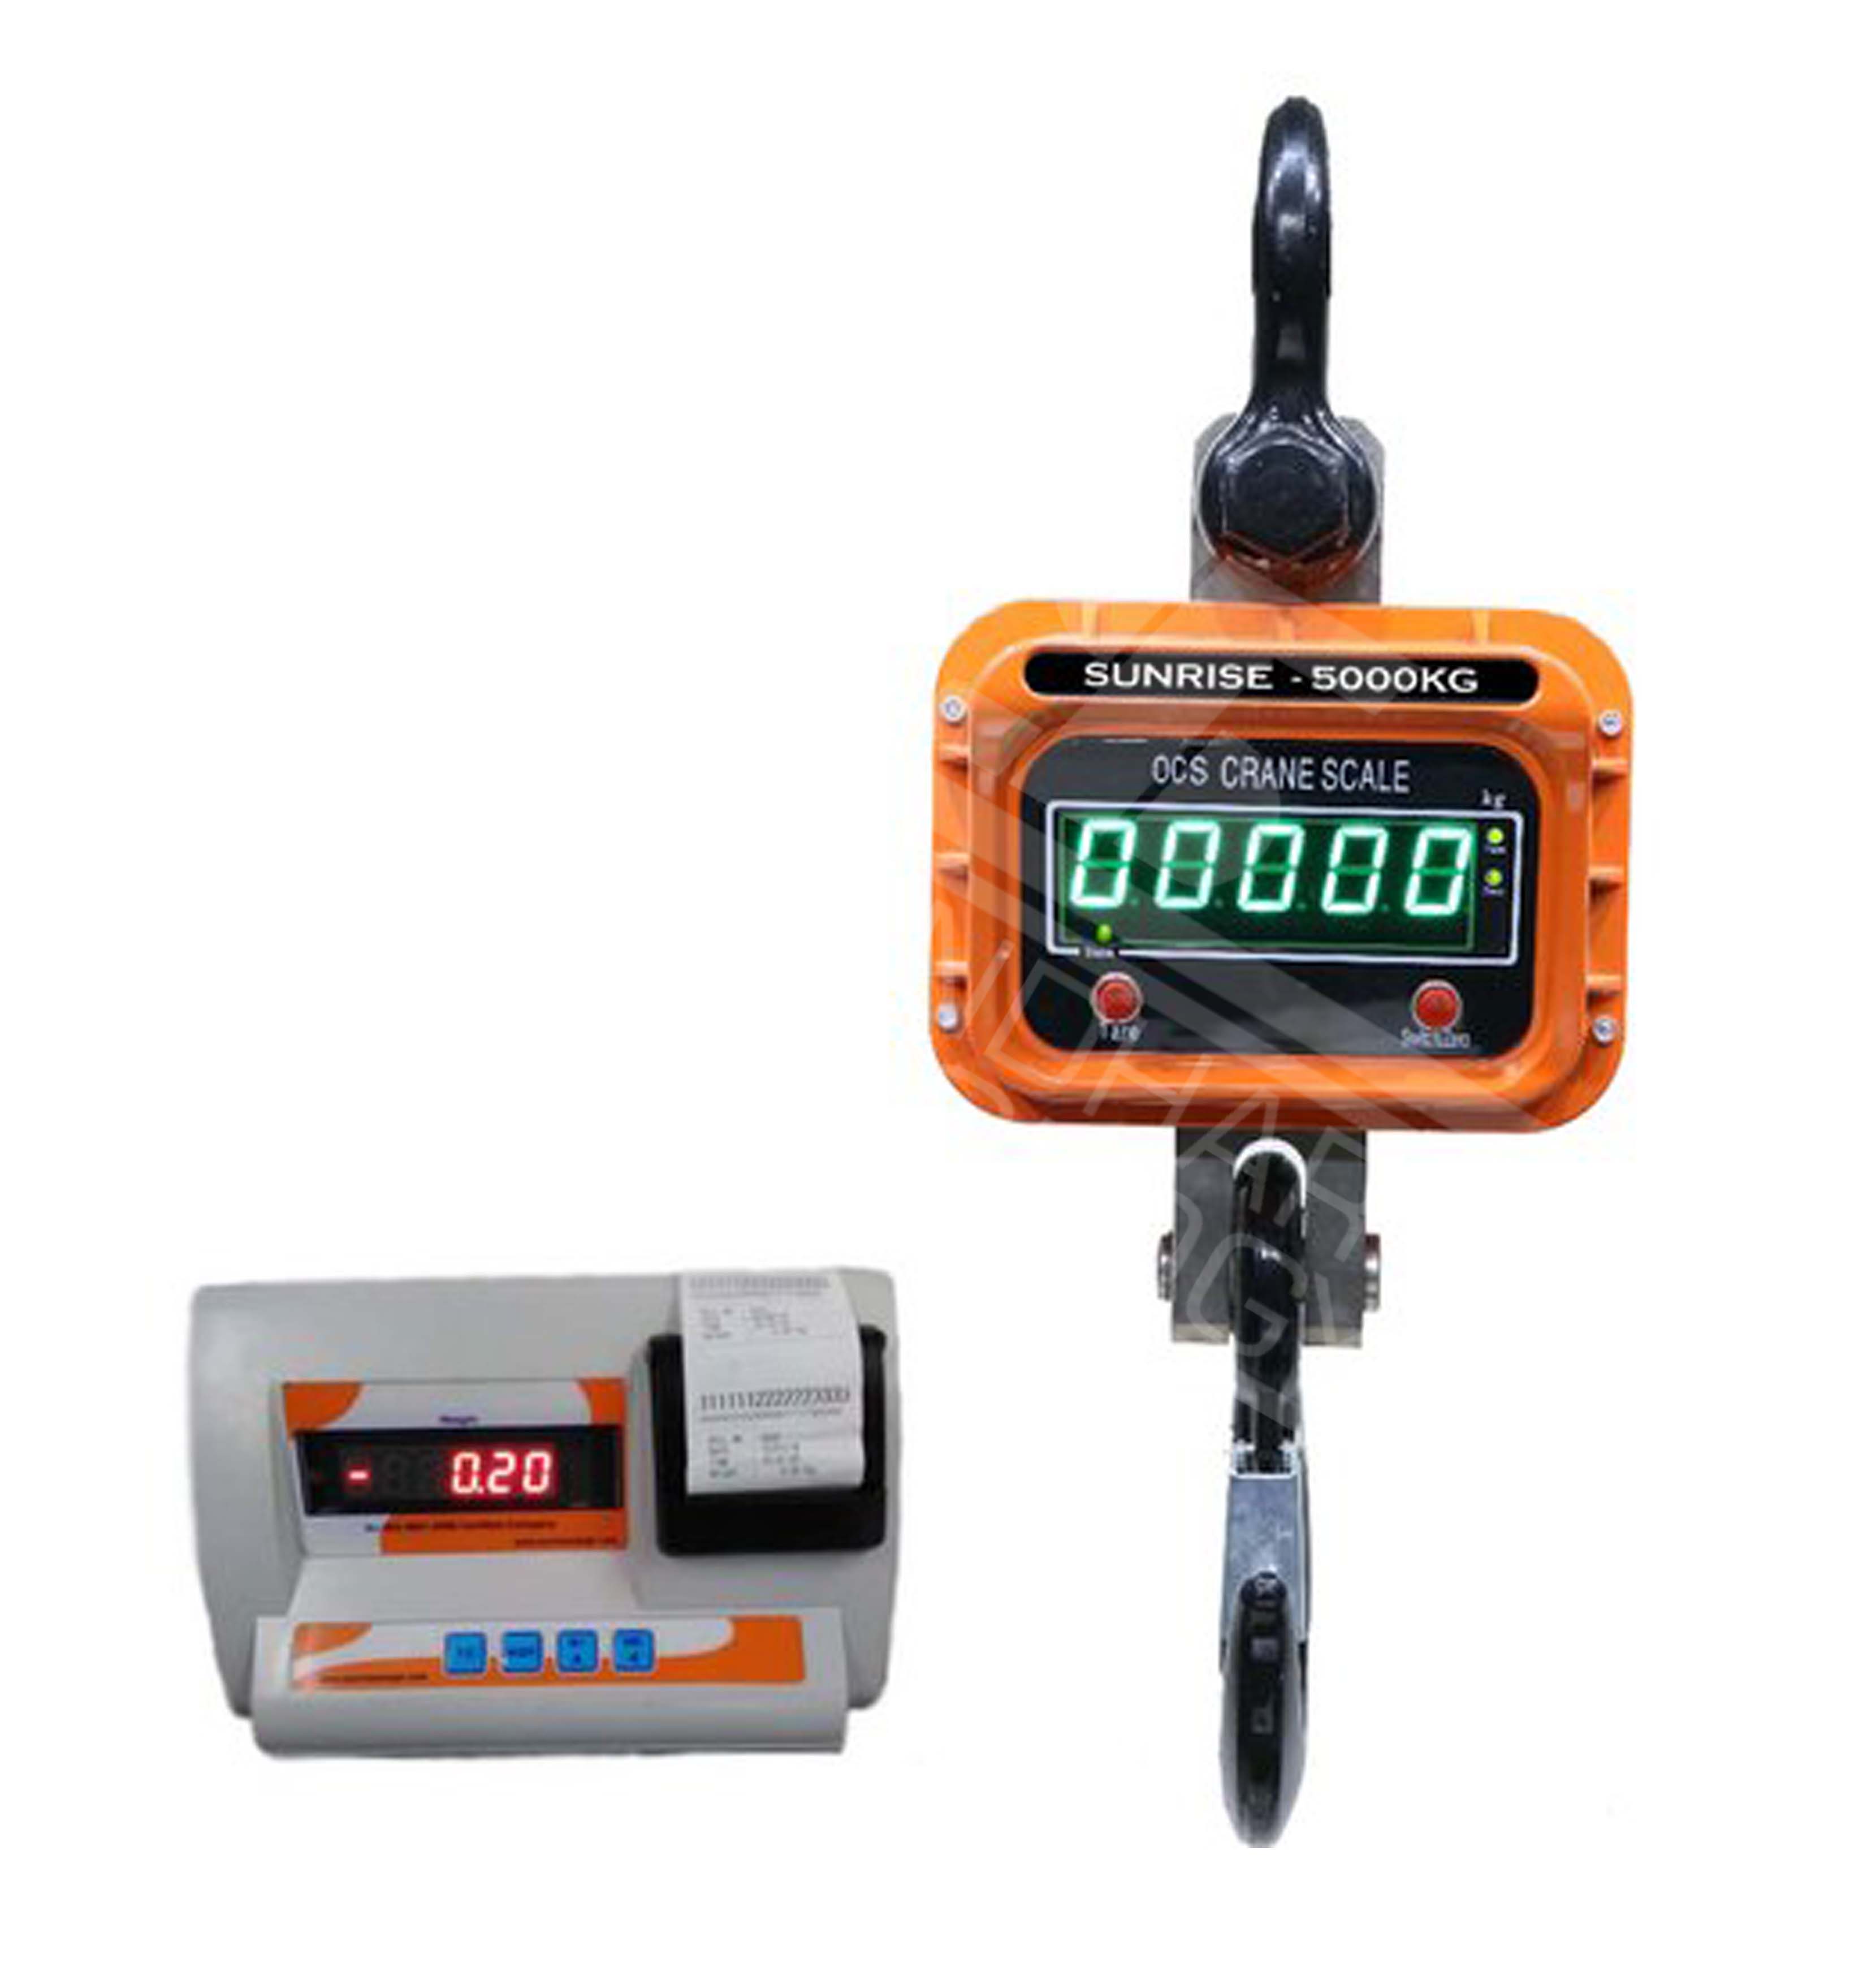 5 Ton Crane Scale With wireless Printer Indicator USB Pen Drive RS232